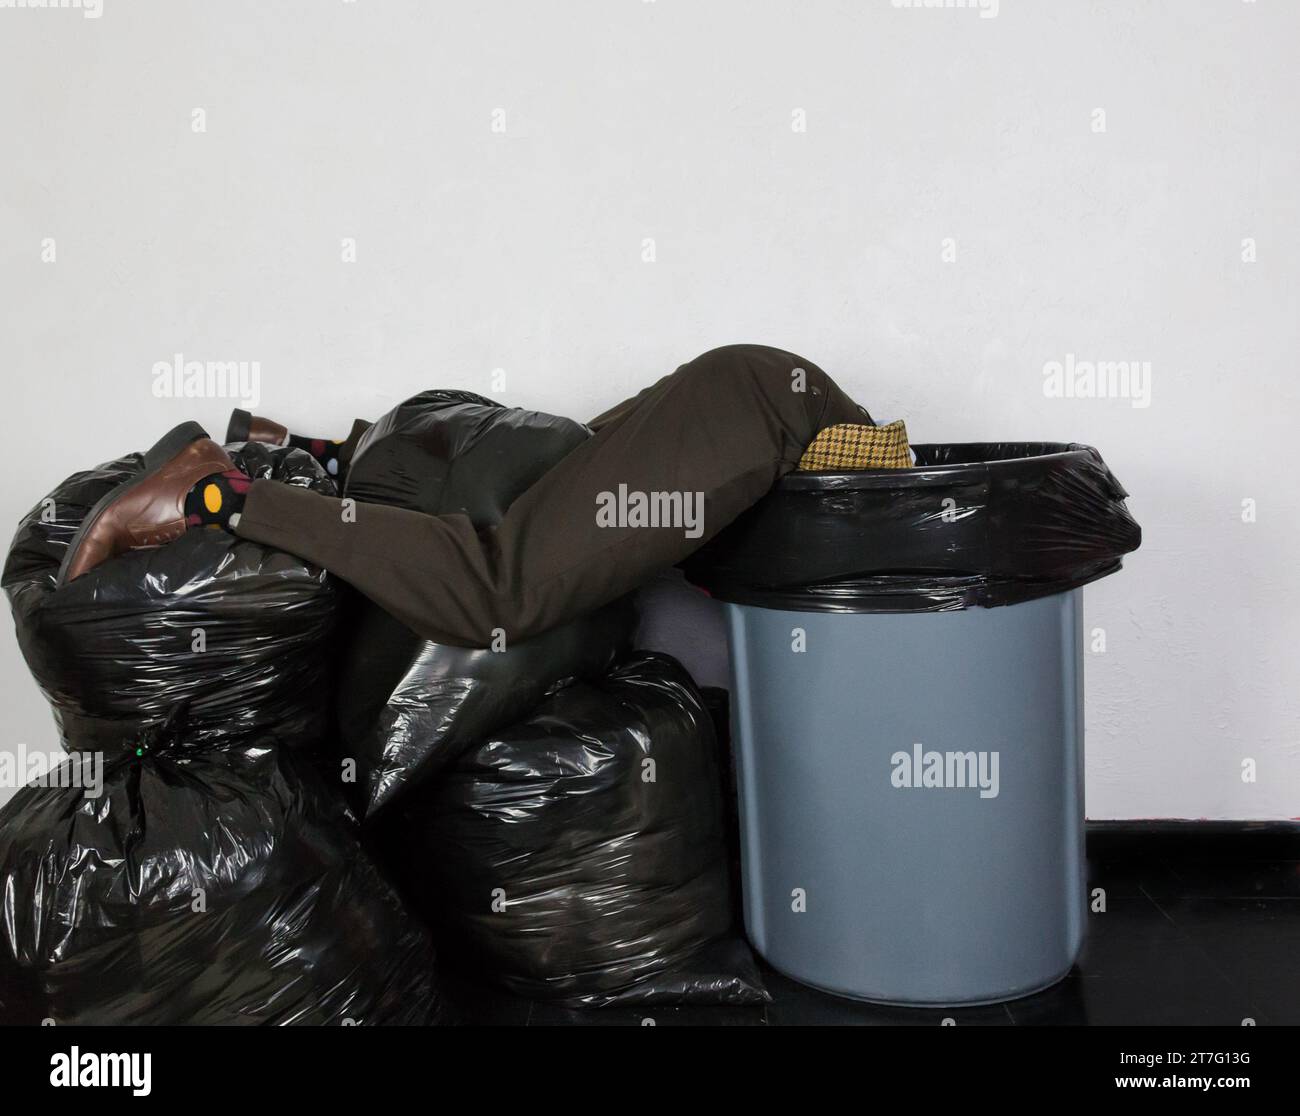 Portrait of Man in Ugly Suit Lying Atop Trash Can and Pile of Trash Bags. Concept of Over a Barrel. Man Thrown Away. Stock Photo